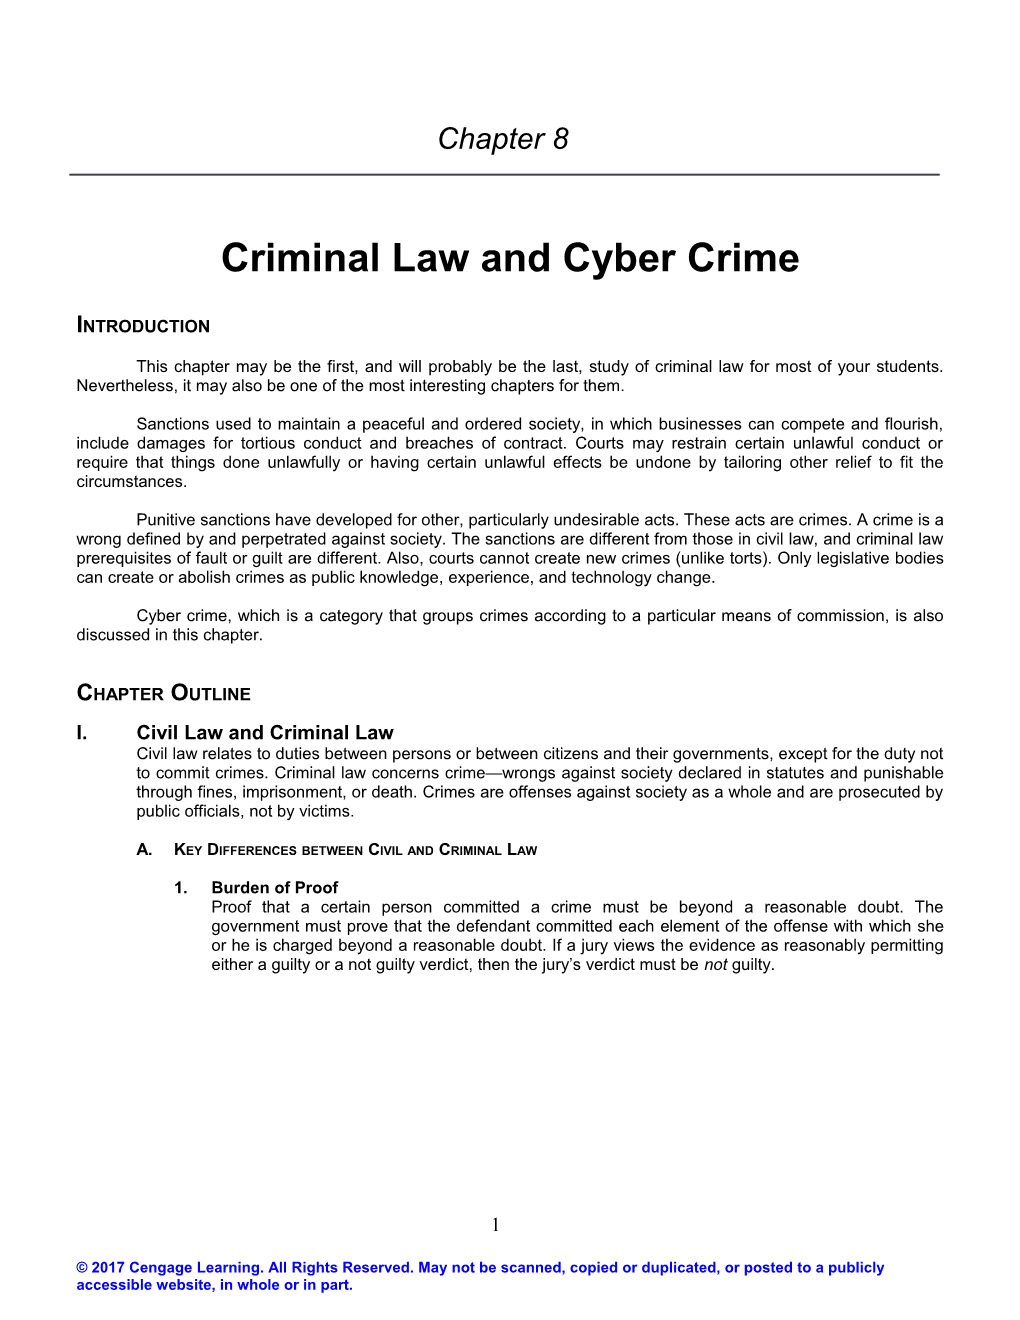 Chapter 8: Criminal Law and Cyber Crime 27